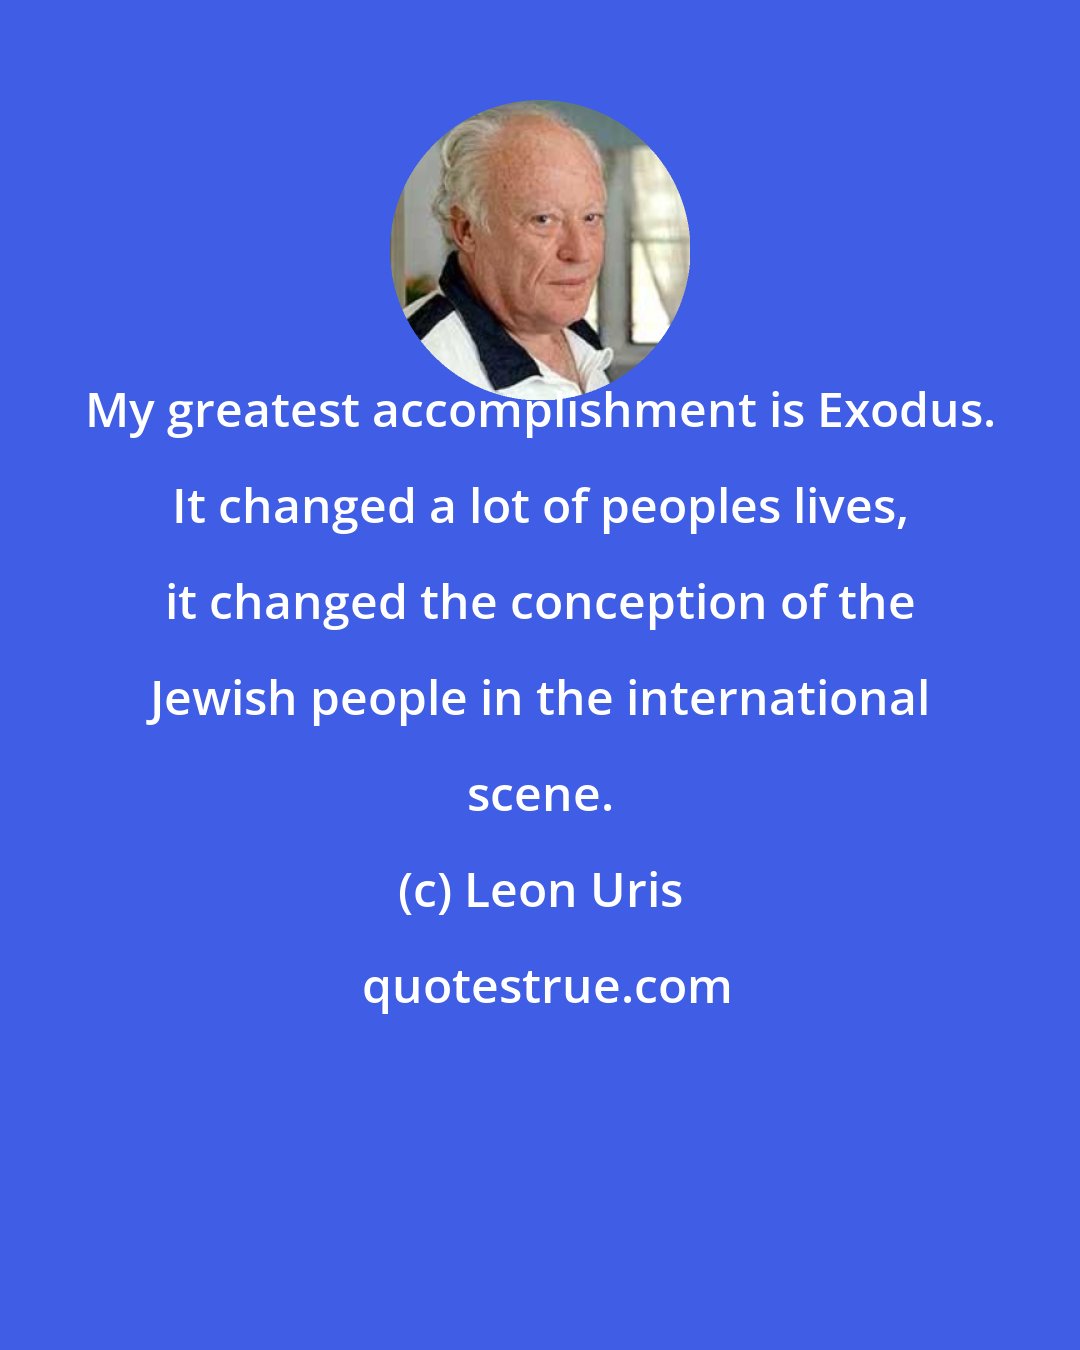 Leon Uris: My greatest accomplishment is Exodus. It changed a lot of peoples lives, it changed the conception of the Jewish people in the international scene.